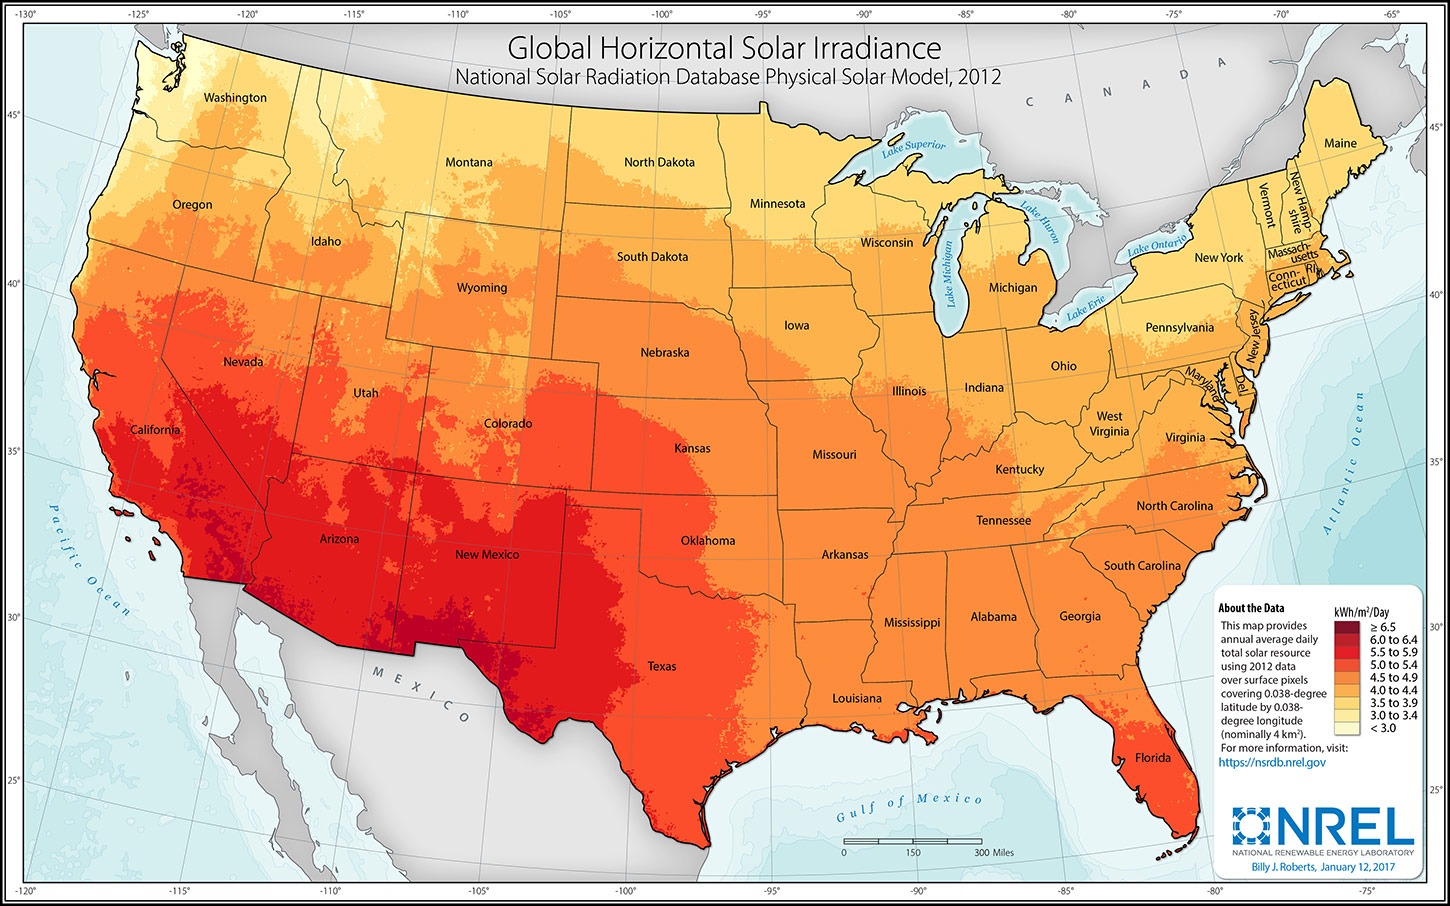 Graphic of a map of solar resource availability in the United States, depicting annual average daily total solar resource using 2012 data, reflecting high concentrations of solar in the South and Southwest regions.